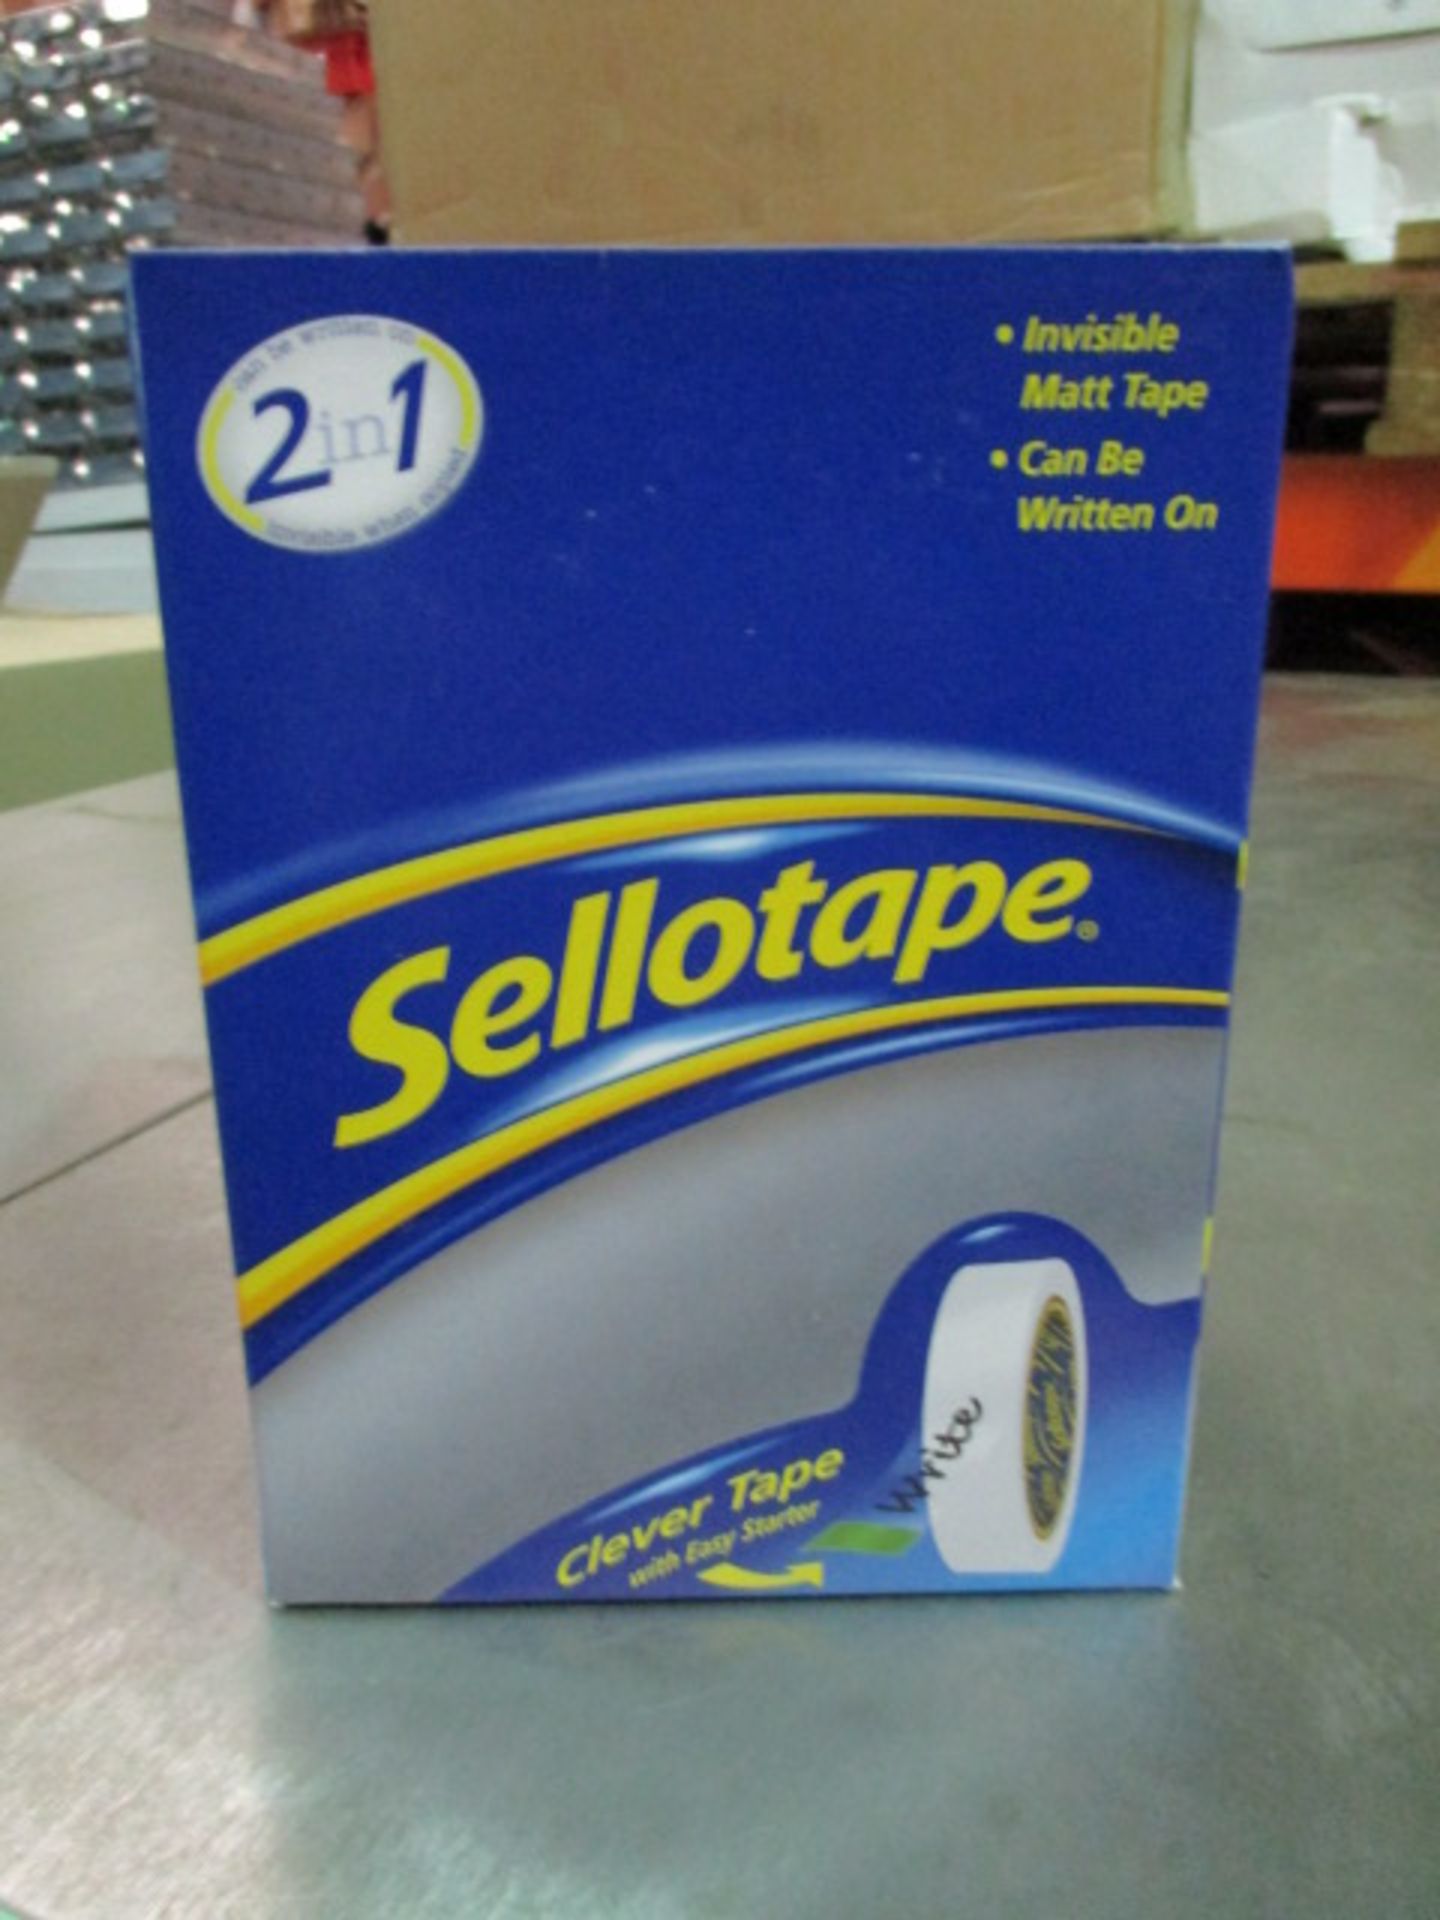 4 x Boxes of Sellotape 'Clever Tape' - 6 Rolls Per Box, 24 in Total - RRP £3.99 Per Roll - Image 3 of 4